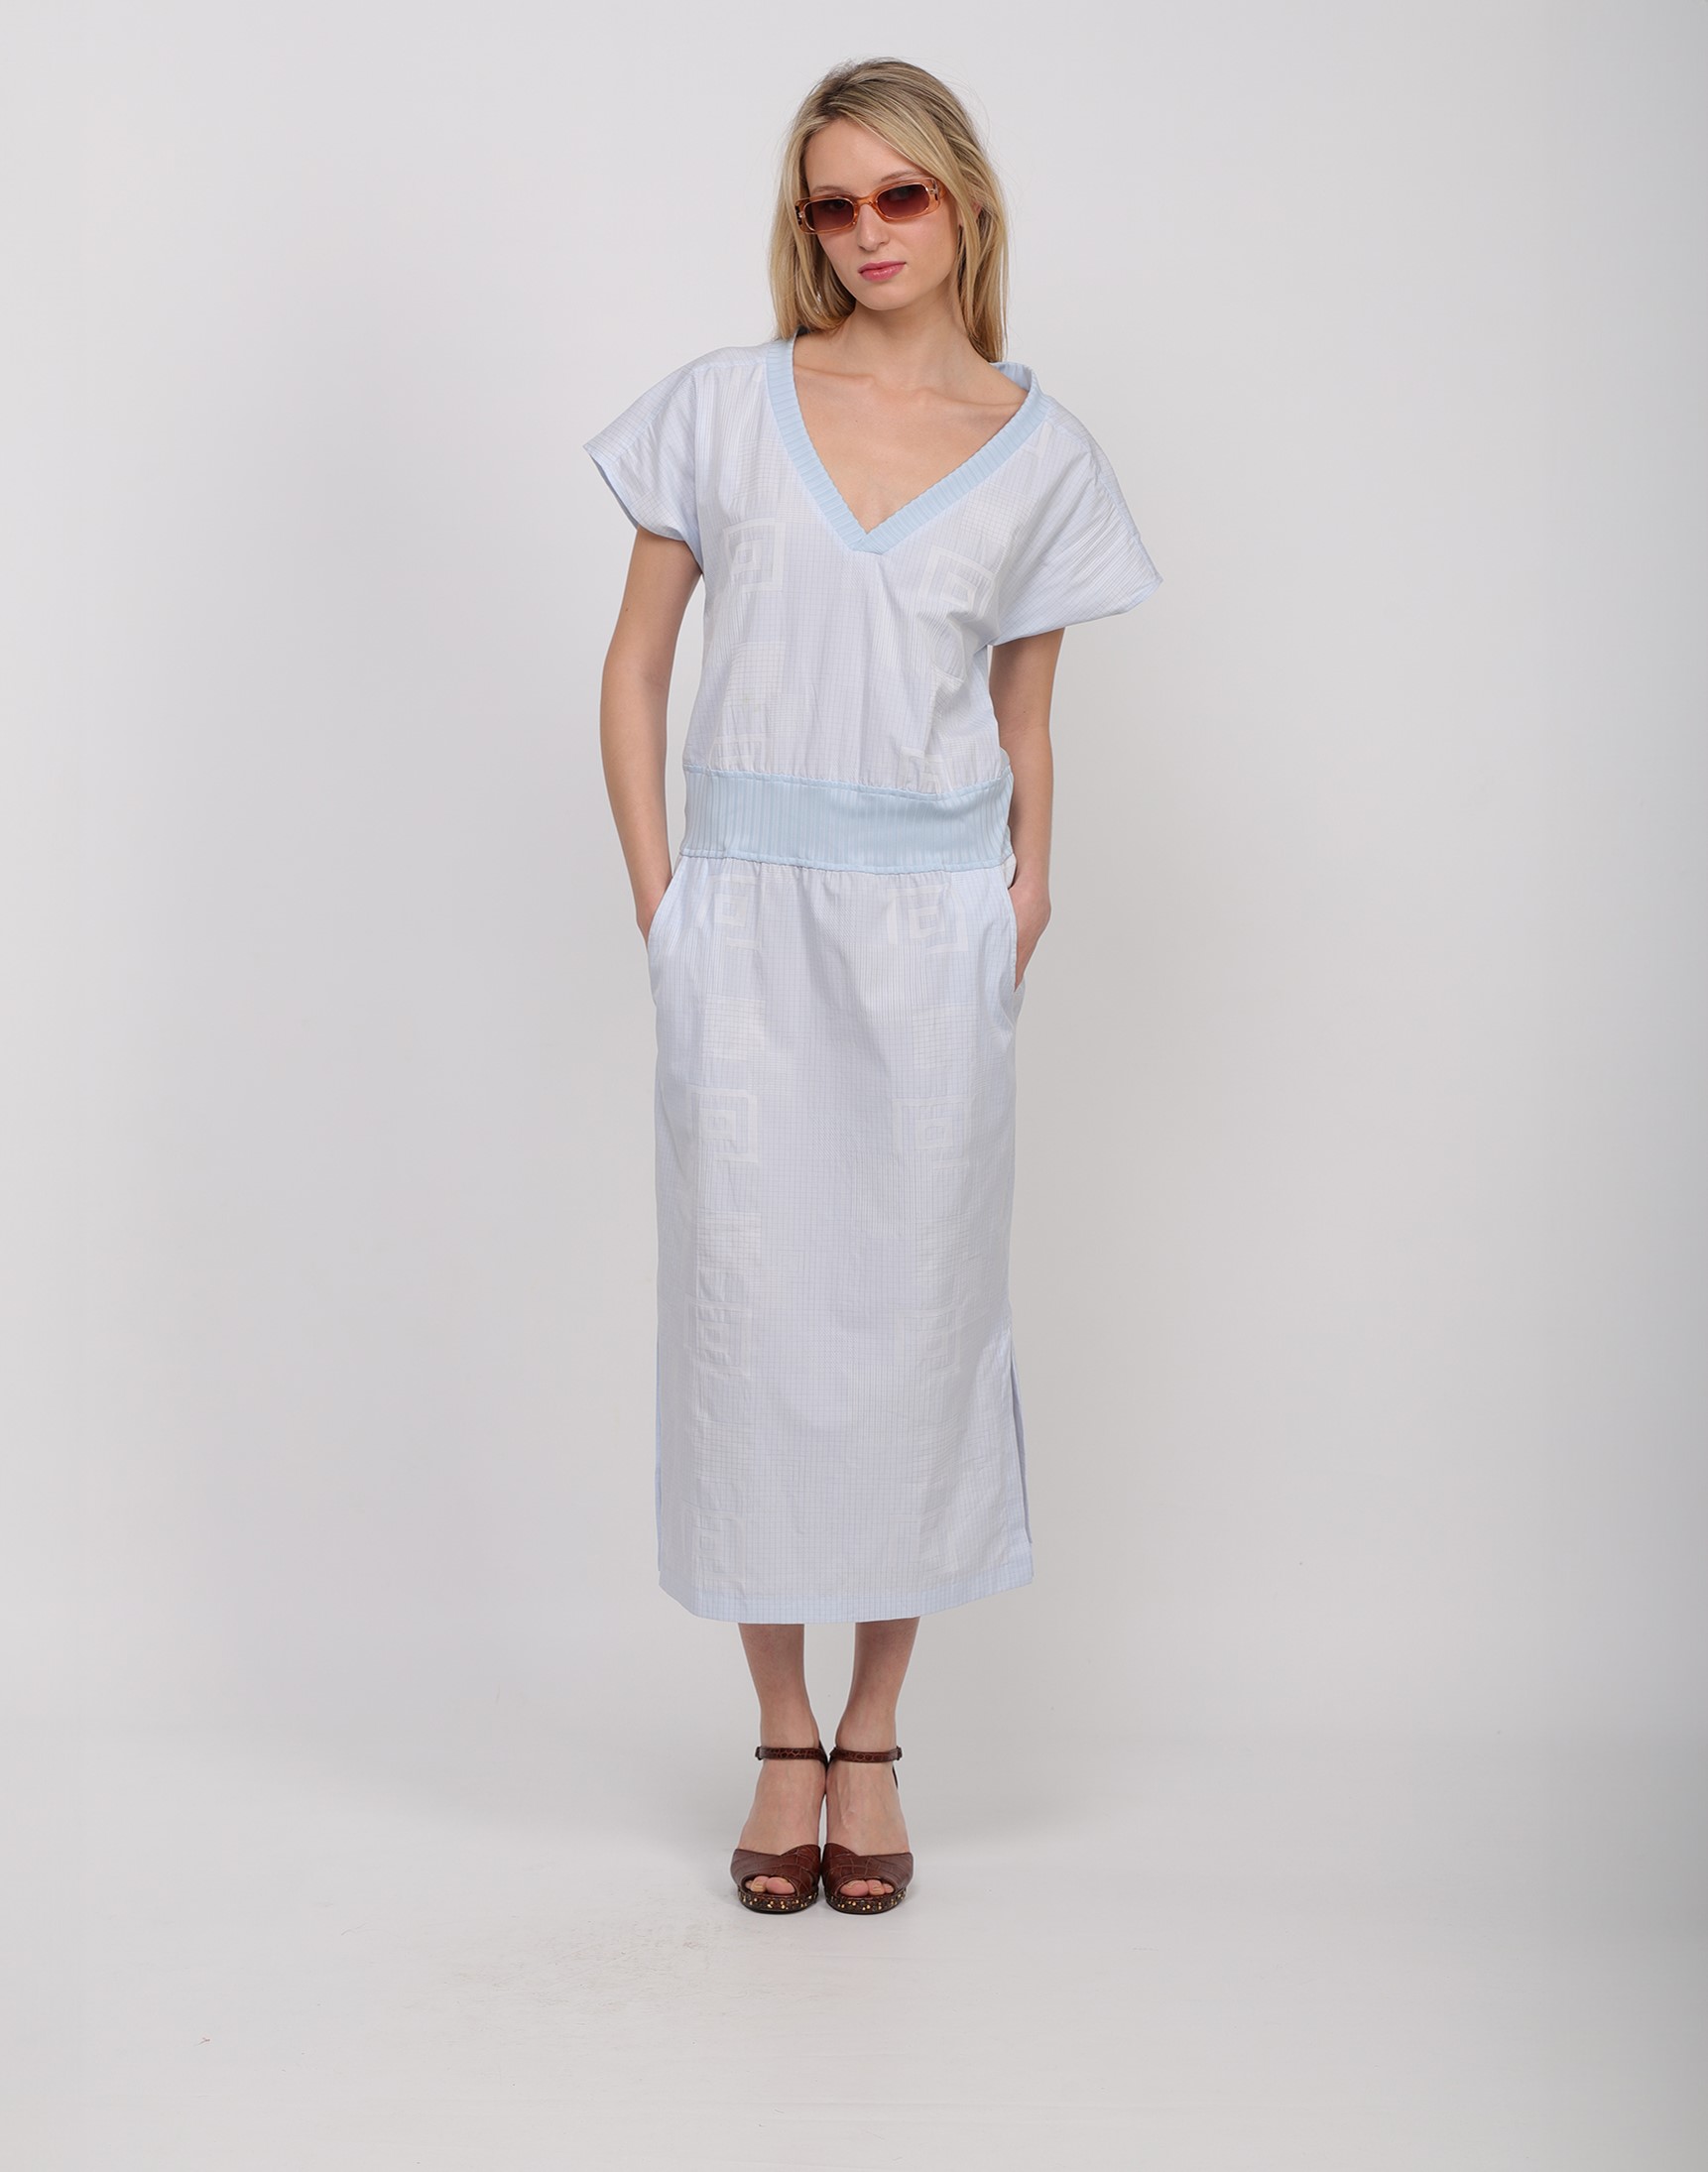 Flowing shift dress in light blue cotton with geometric patterns